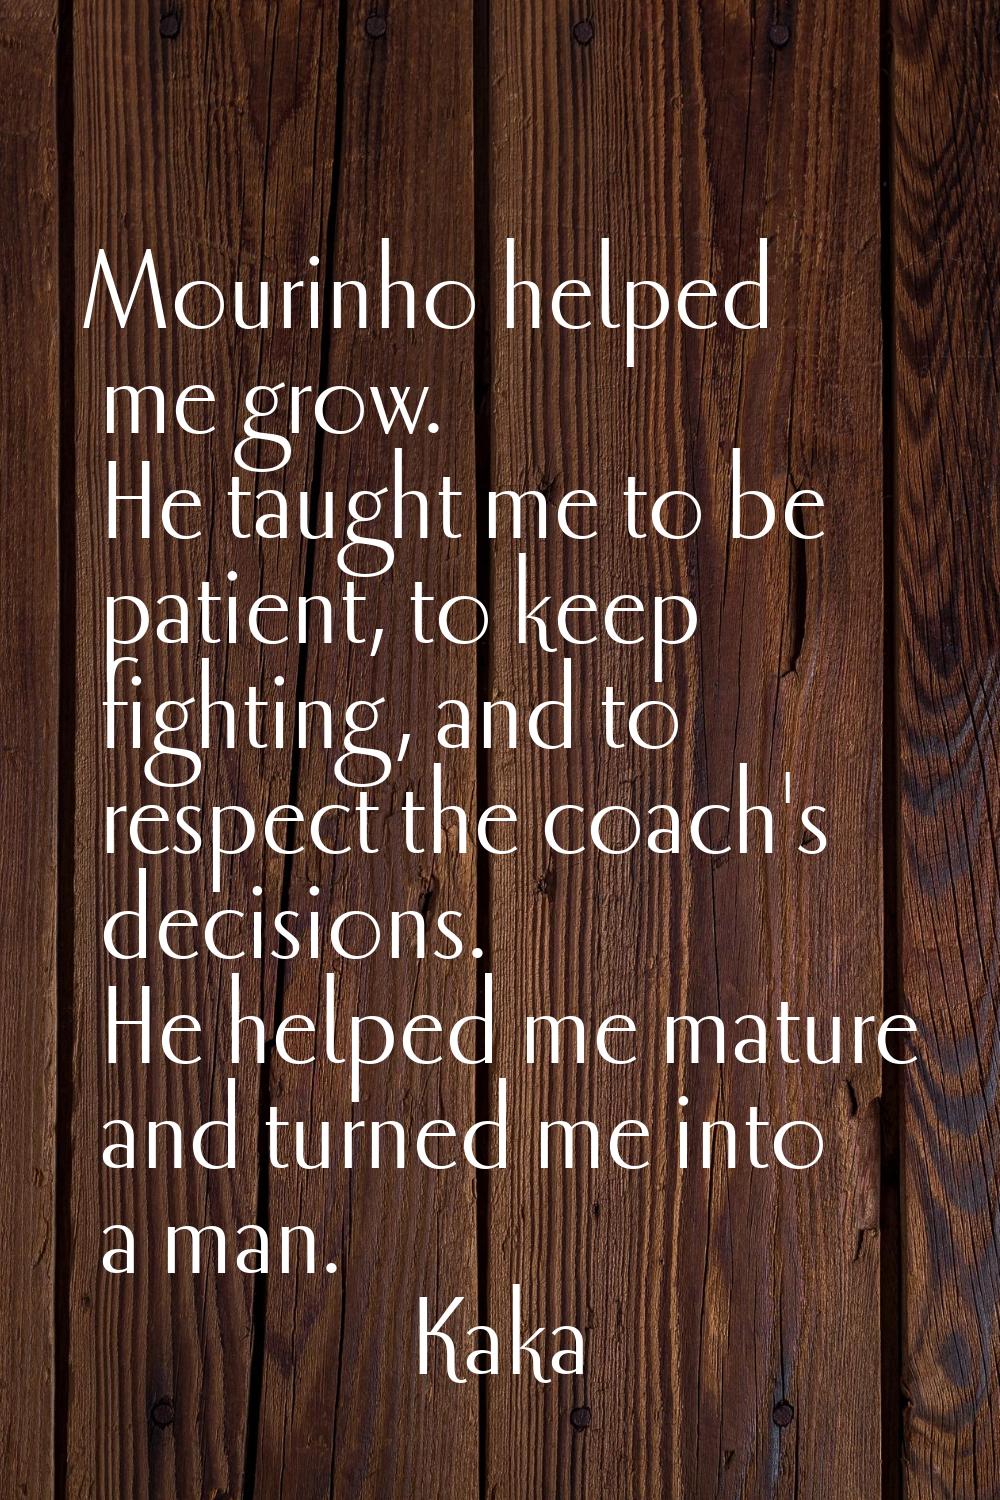 Mourinho helped me grow. He taught me to be patient, to keep fighting, and to respect the coach's d